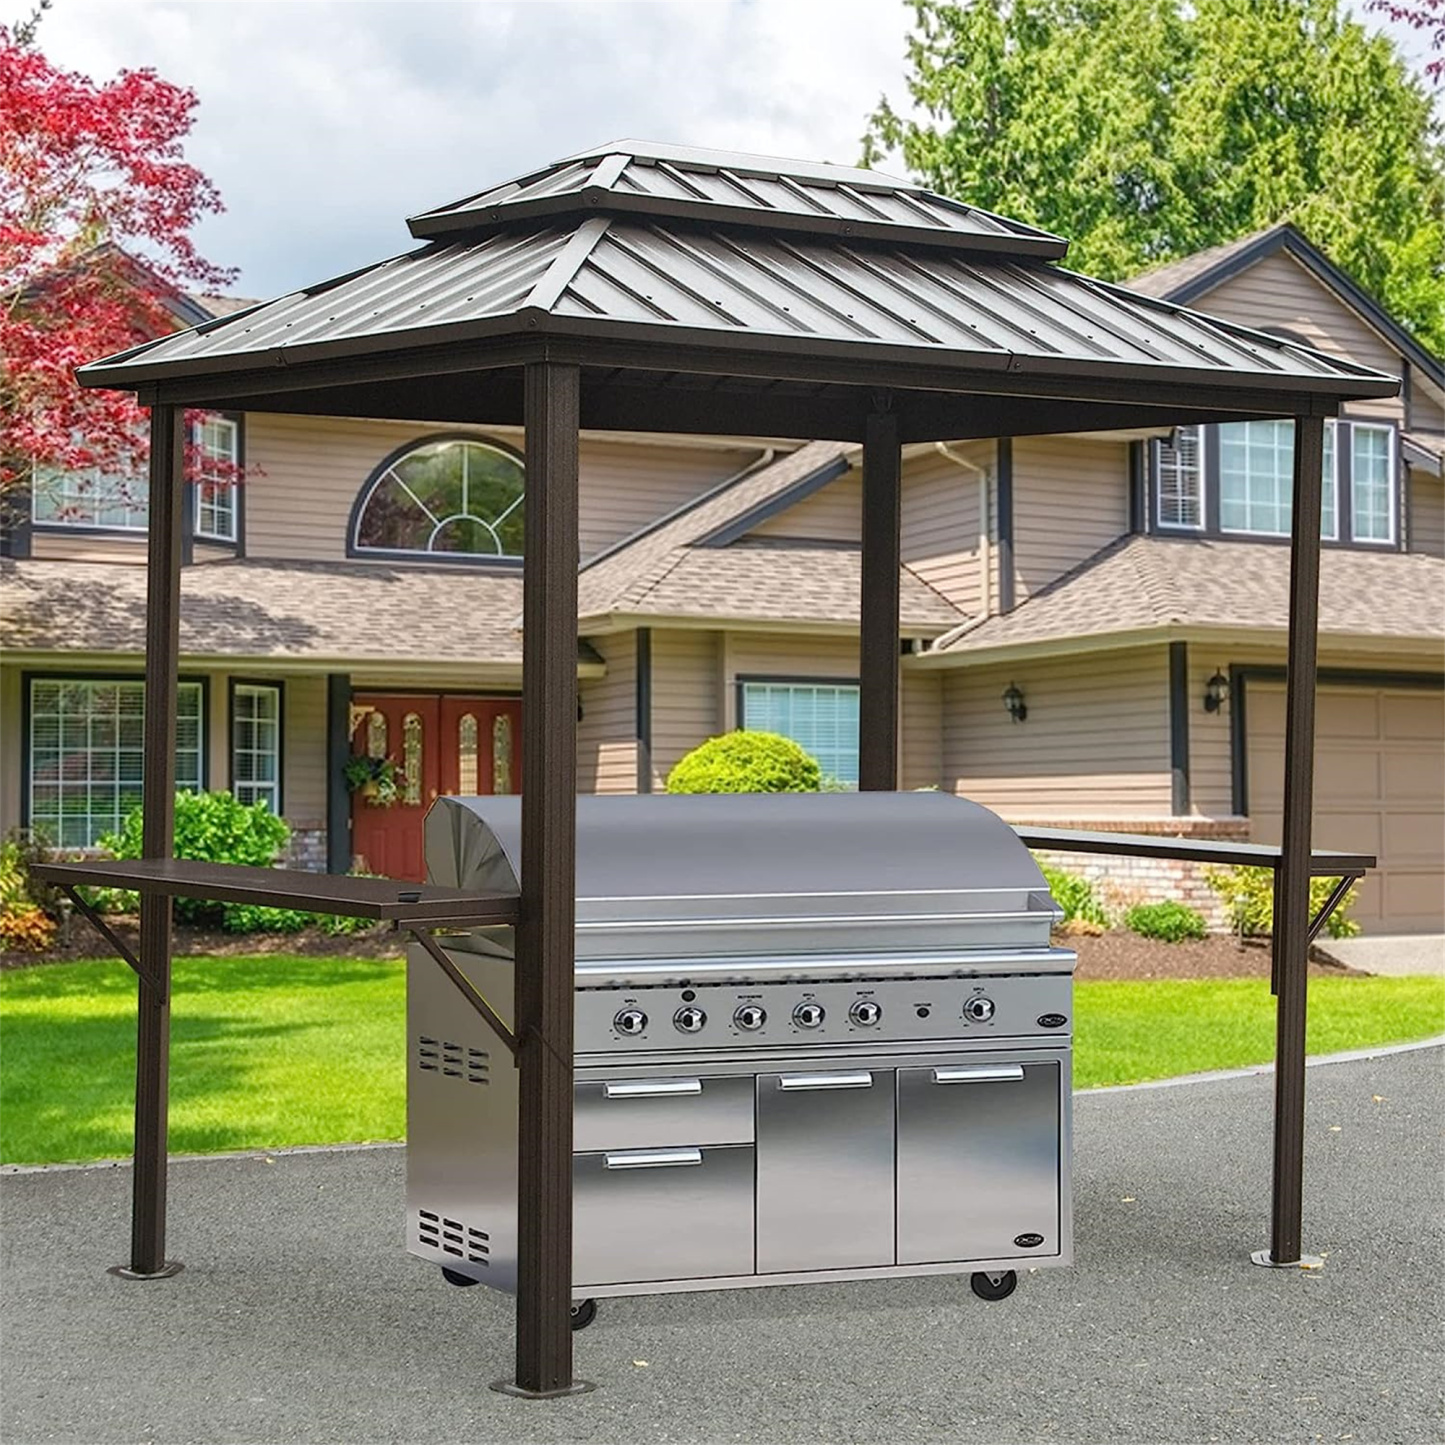 Mondawe Outdoor 8 × 6 Ft Aluminum Frame BBQ Grill Permanent Double Roof Hardtop Gazebo with Shelves Serving Tables for Patio Lawn Deck Backyard and Garden